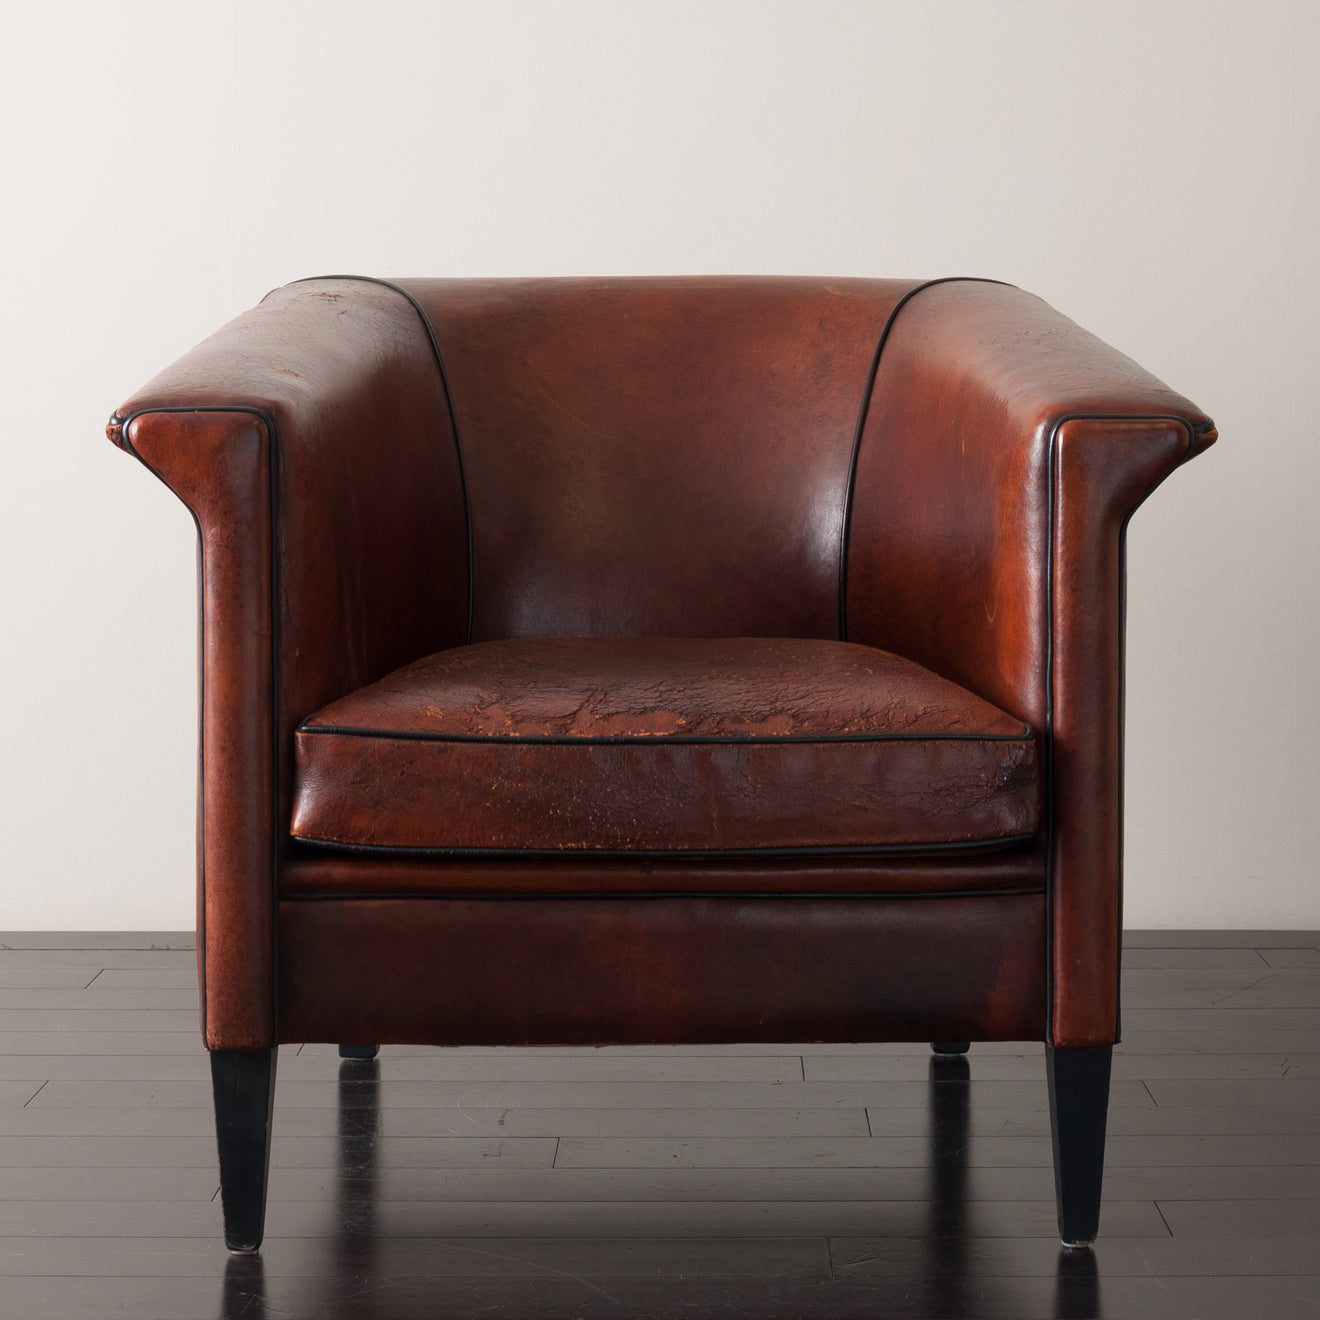 LEATHER LOUNGE CHAIR BY BART VAN BEKHOVEN